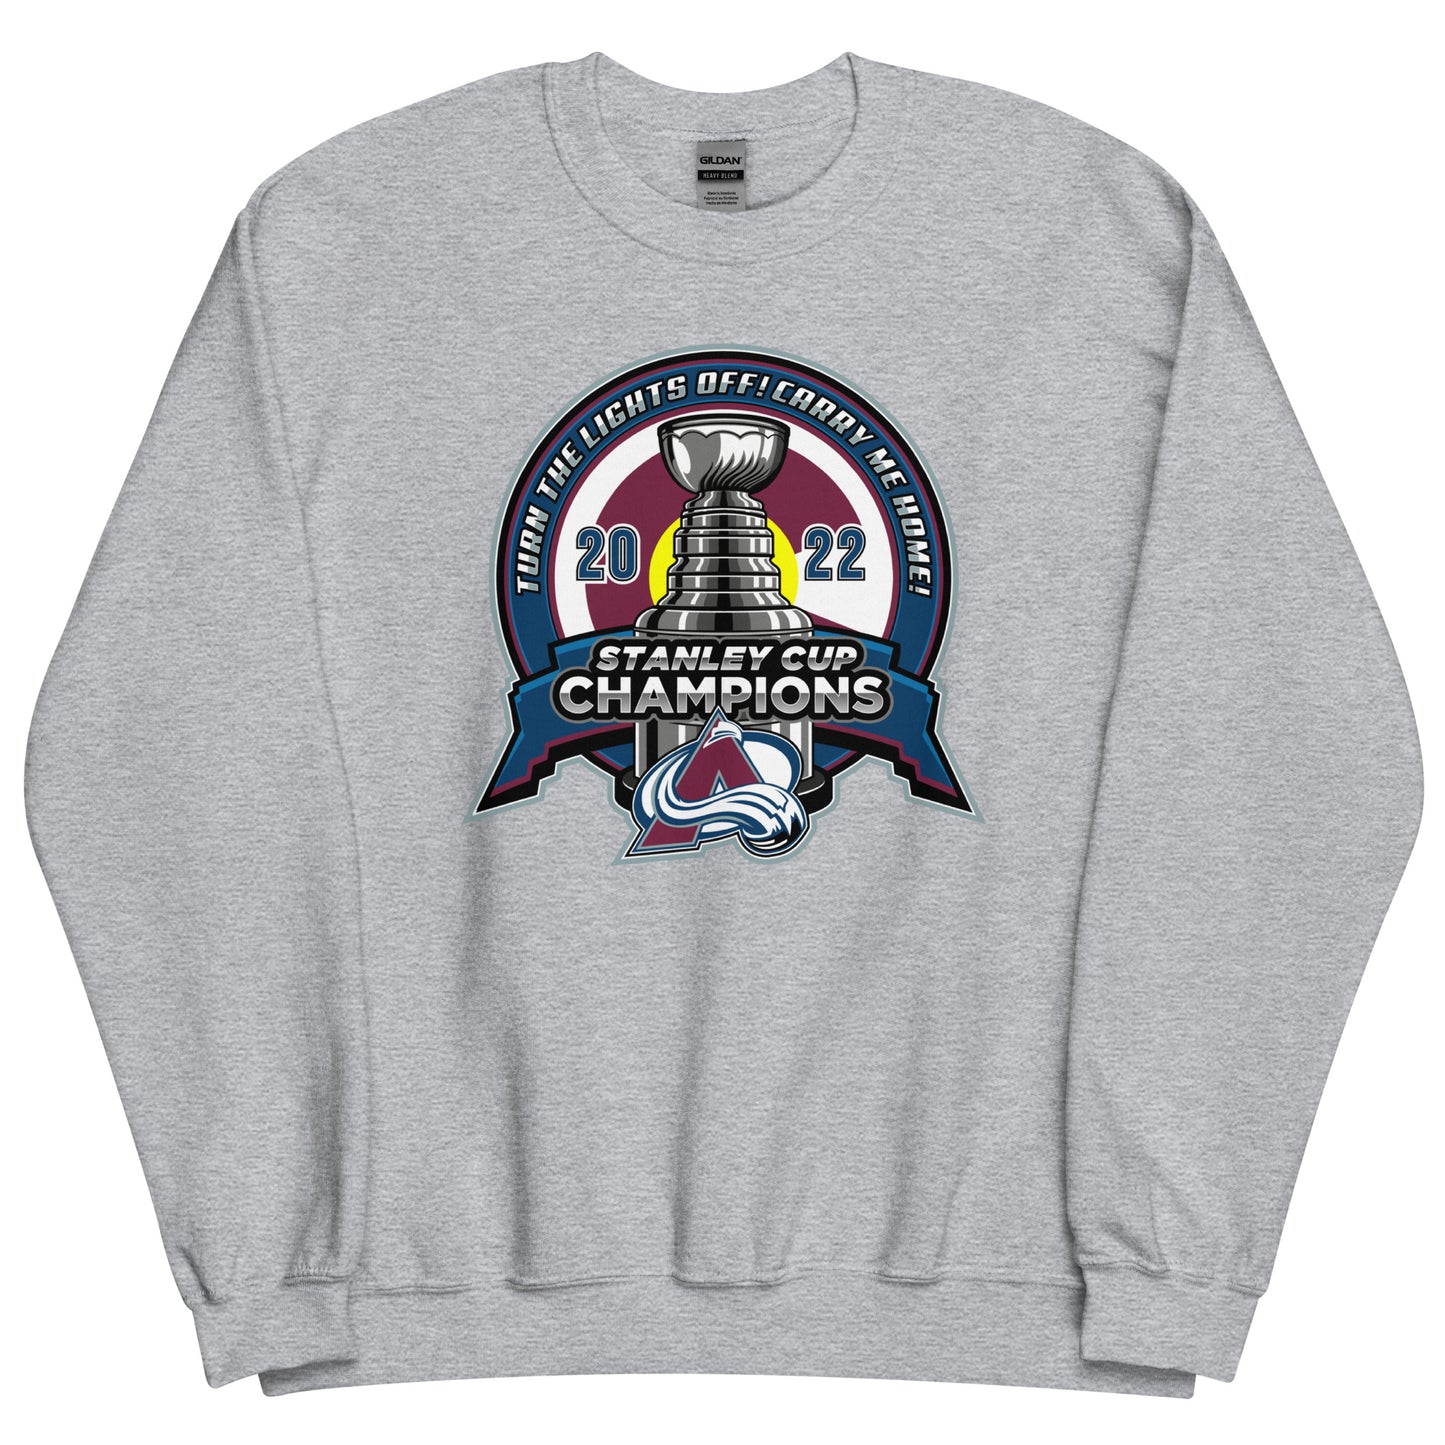 Turn The Lights Off, Carry Me Home Champs Sweatshirt